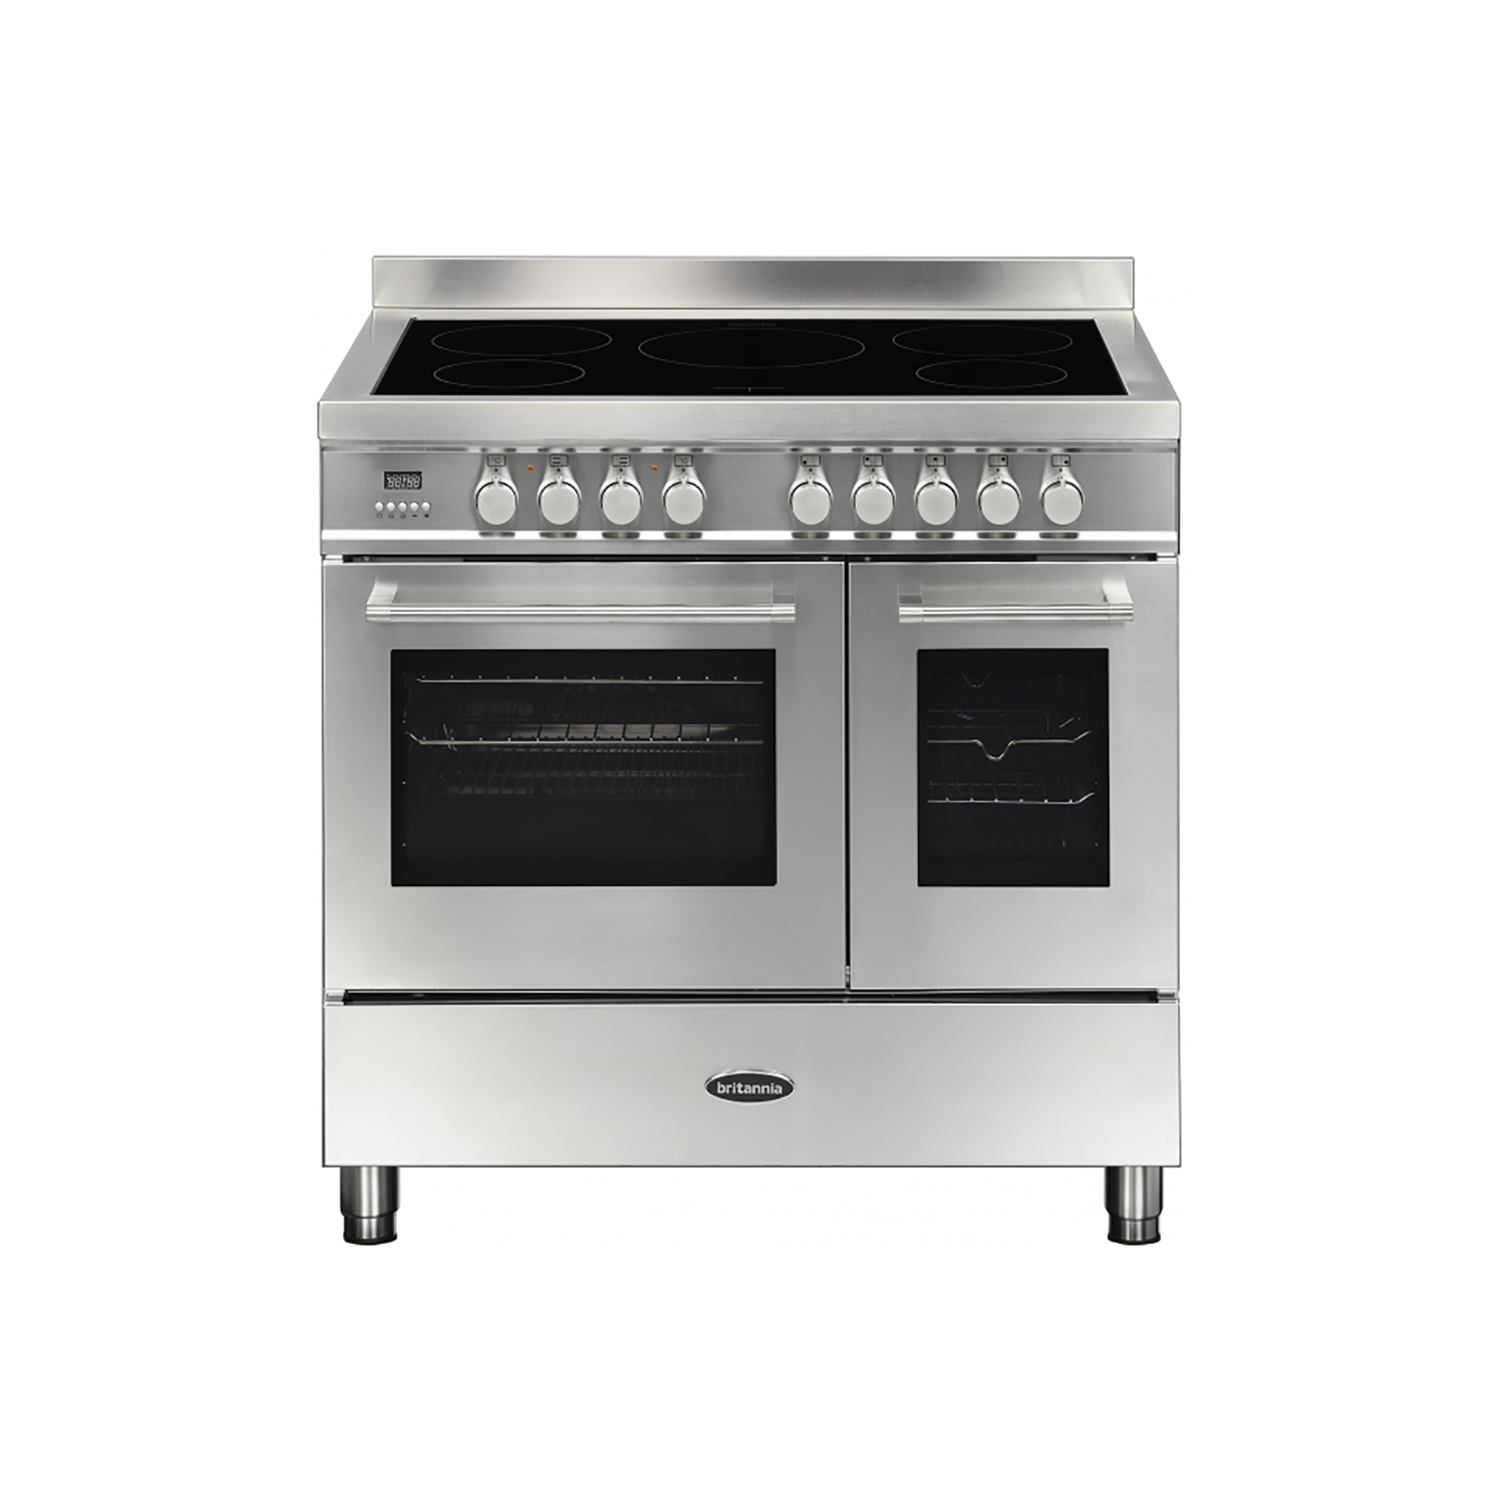 Refurbished Britannia Q Line Modern 90cm Double Oven Induction Electric Range Cooker Stainless Steel